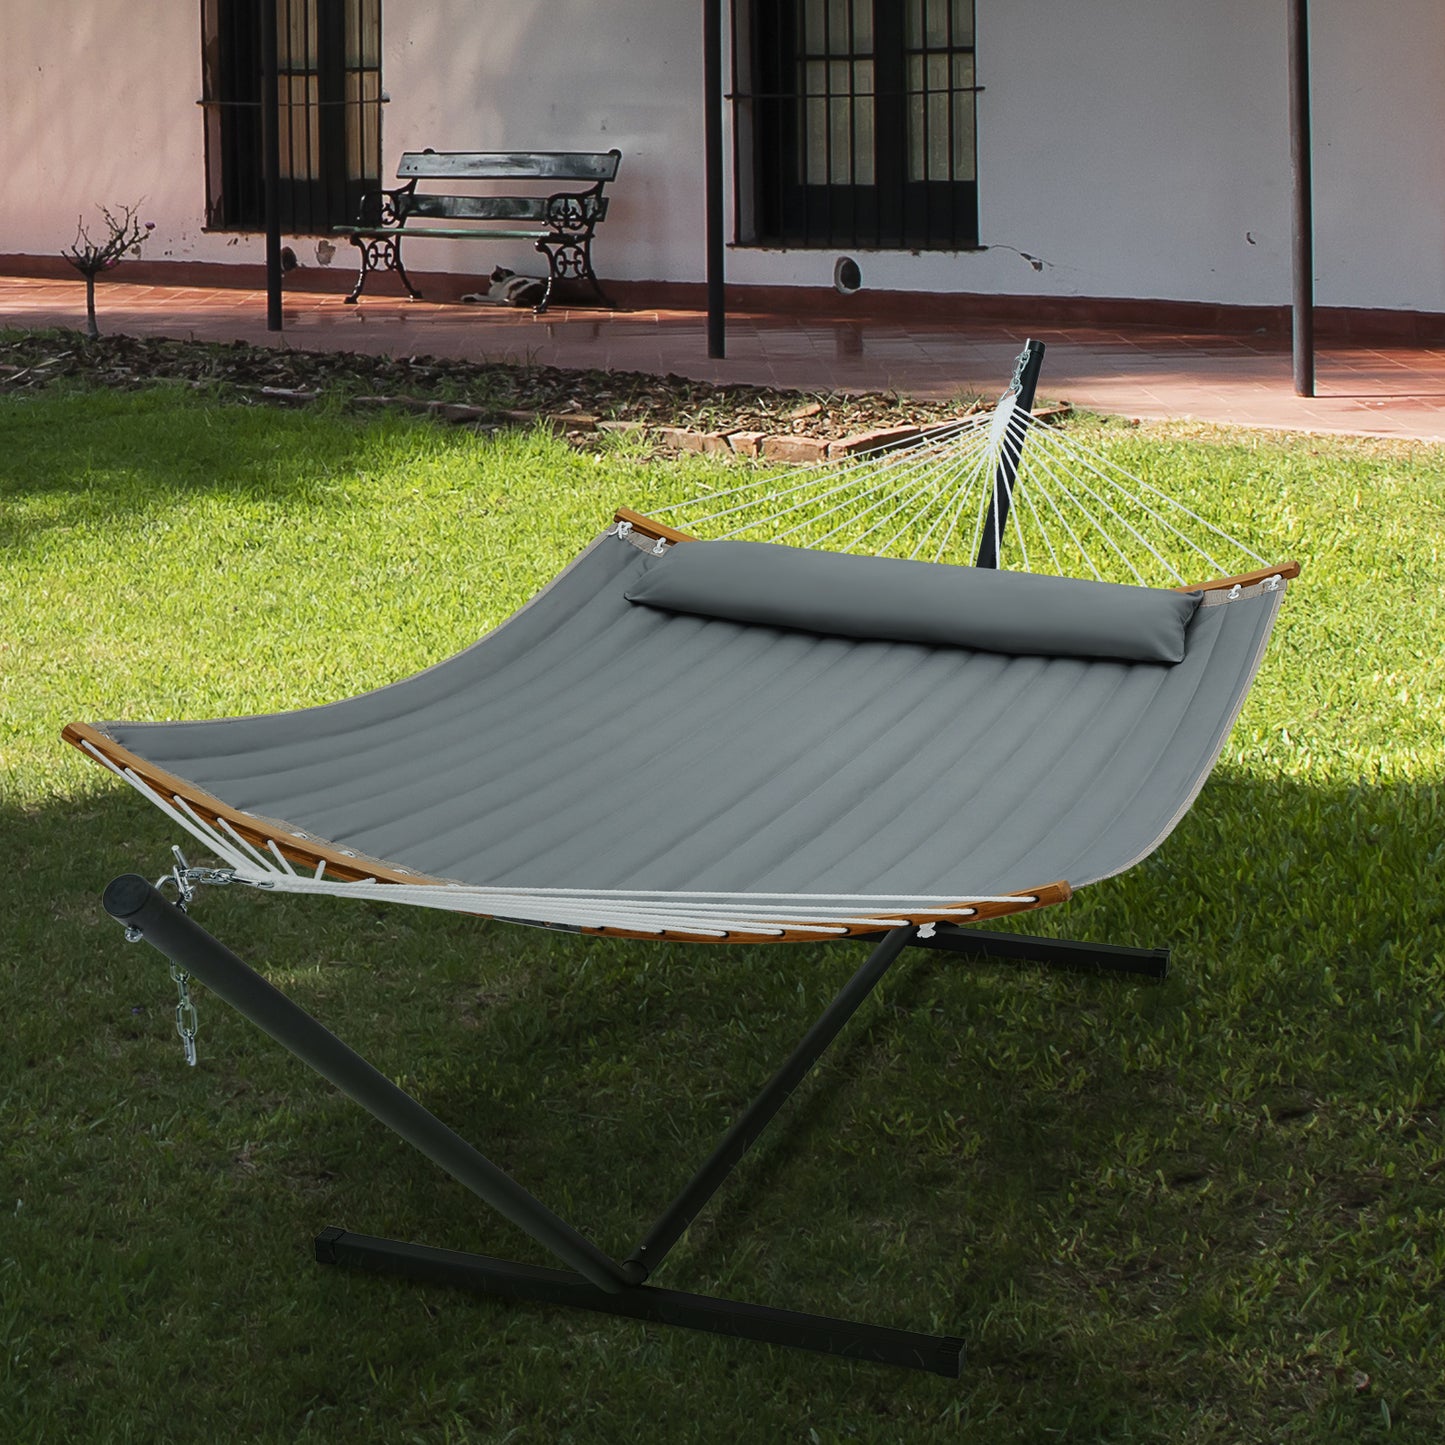 SUPERJARE 12FT Double Hammock with Stand, Gray - 3702B - SUPERJARE